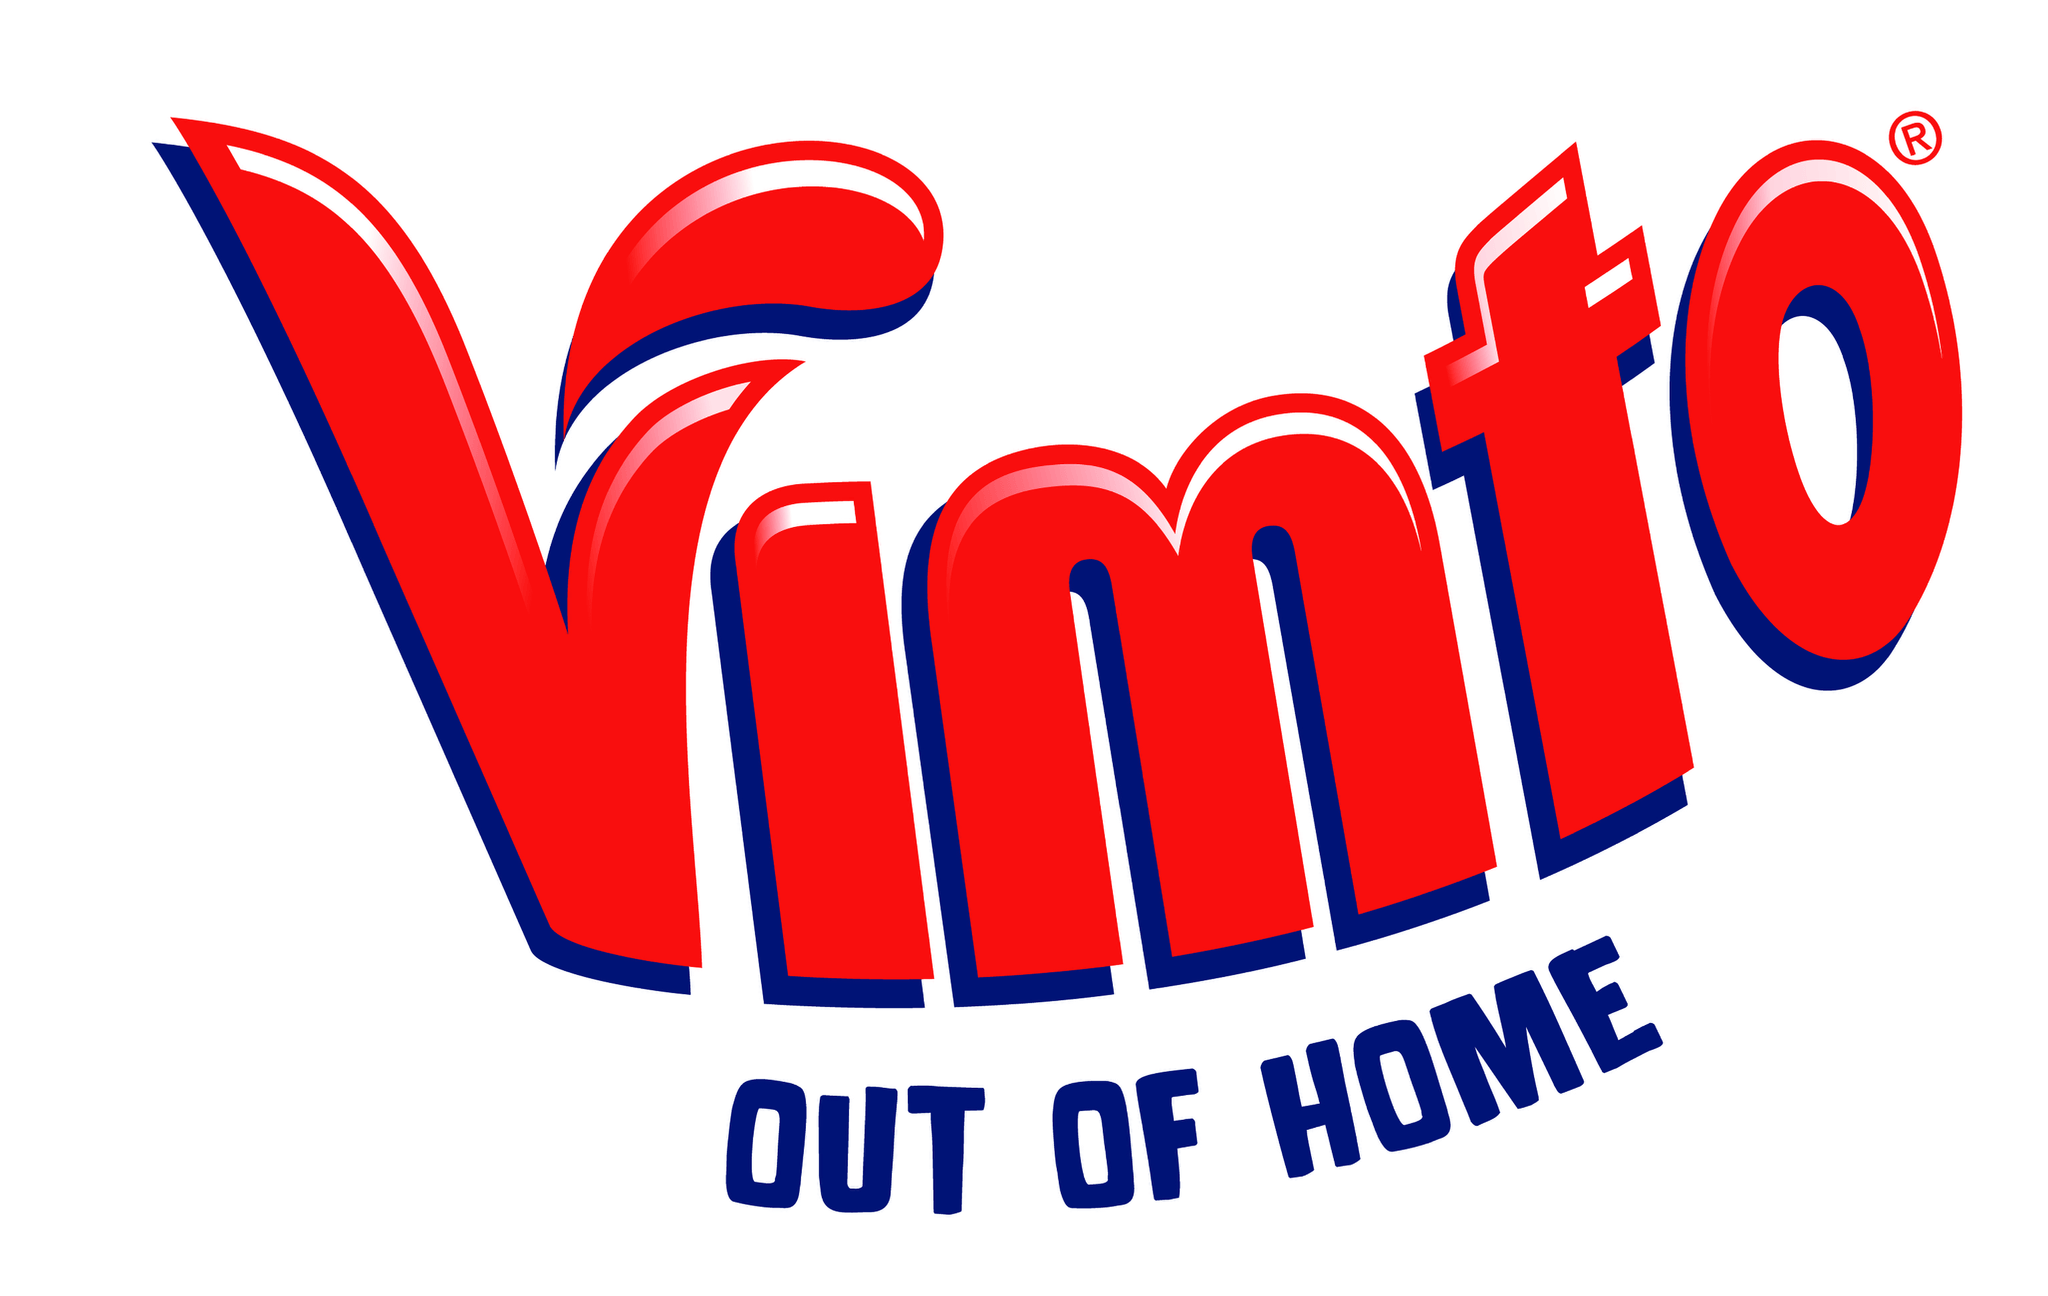 Vimto Out of Home